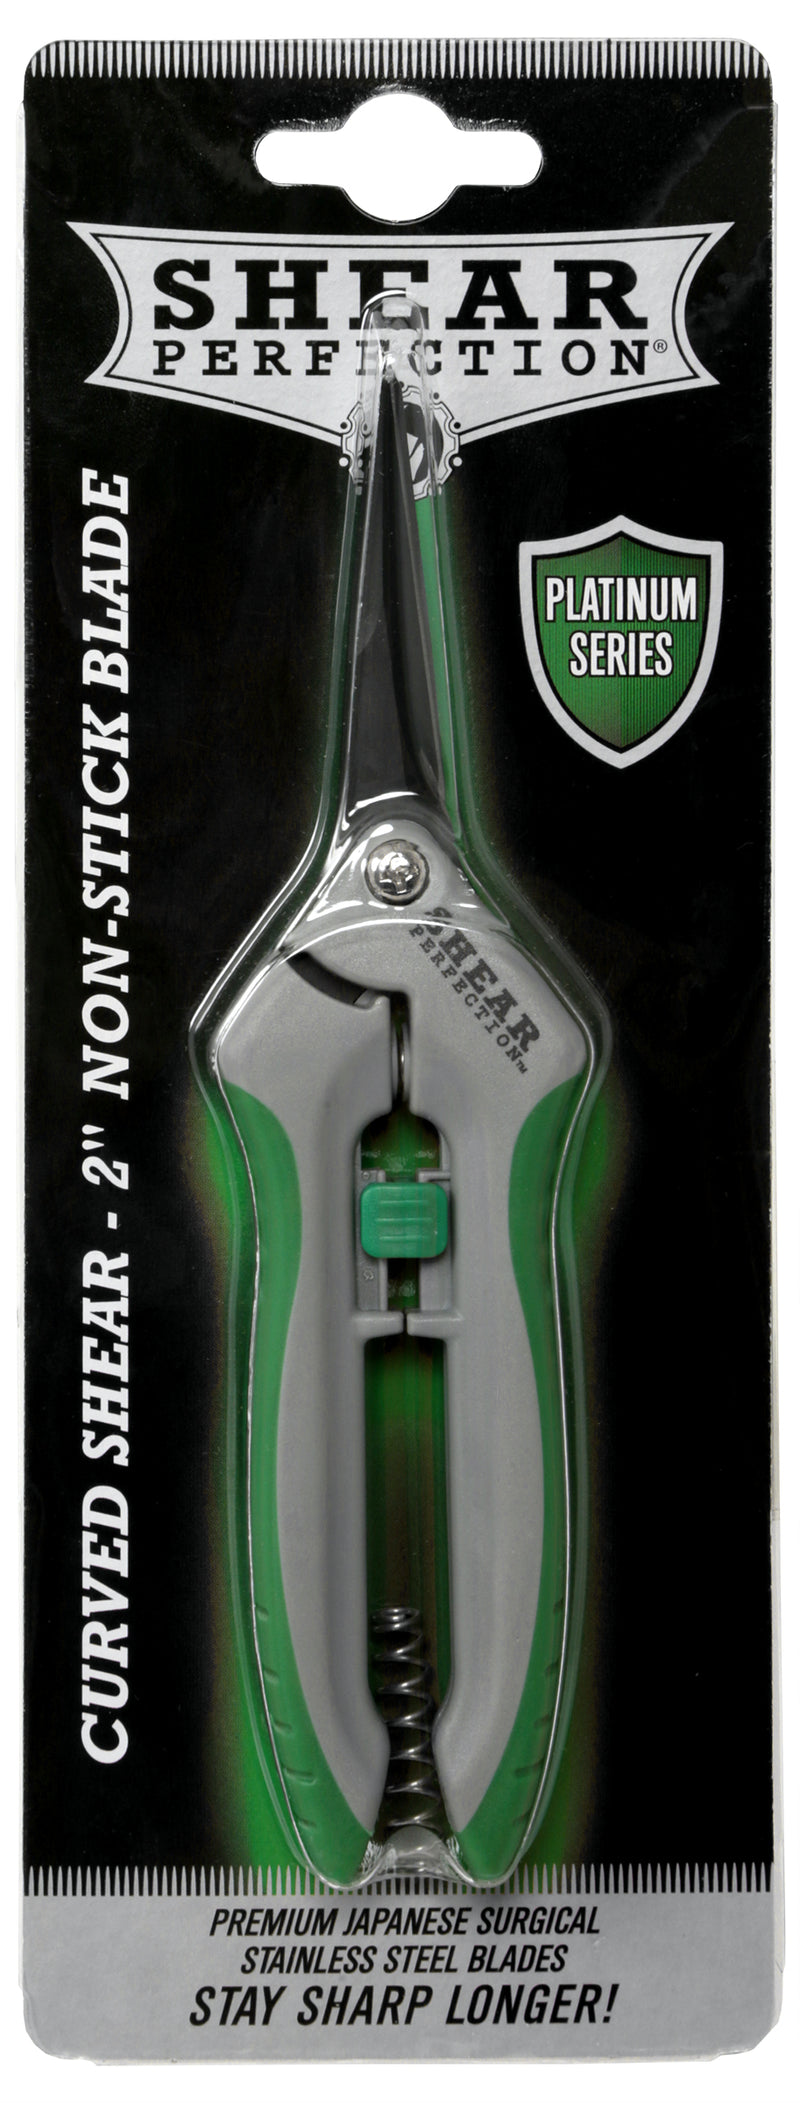 Shear Perfection® Platinum Trimming Shear - 2 in Curved Non Stick Blades